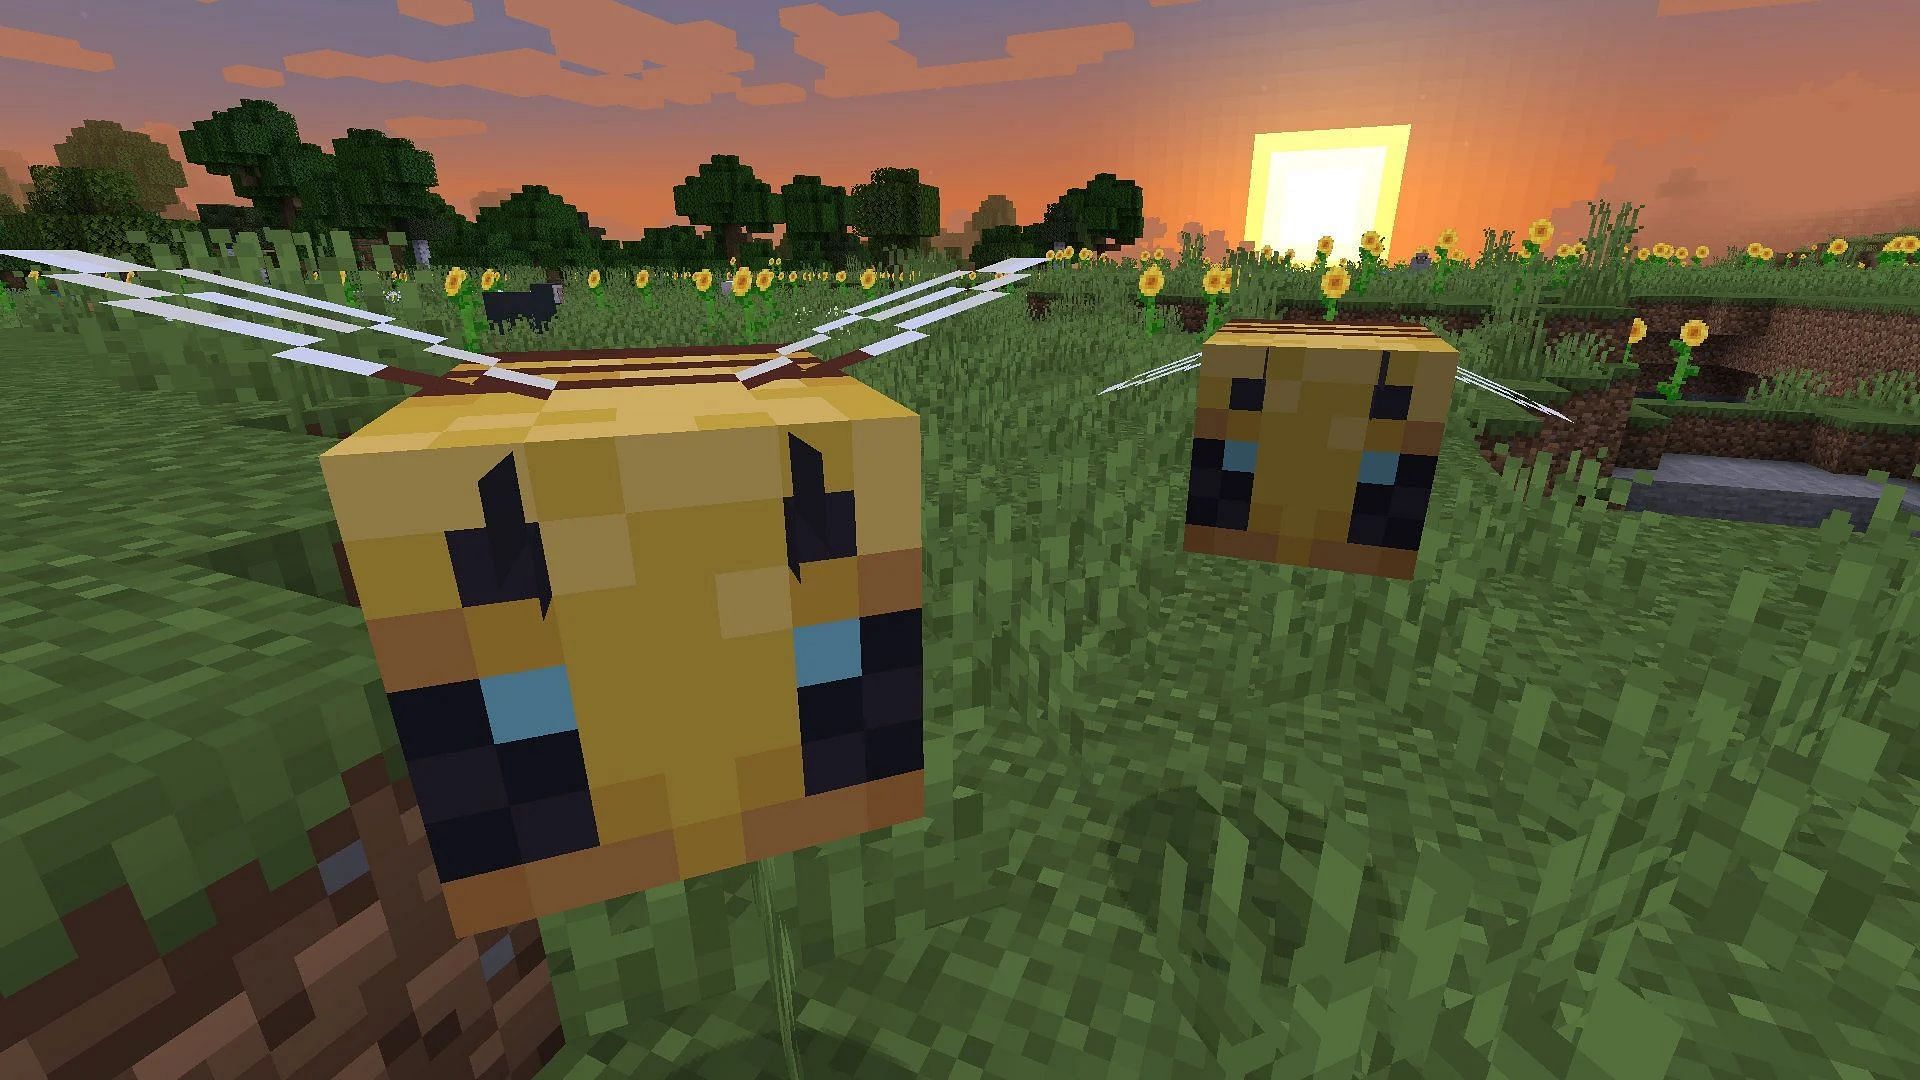 Bees flying around in a plains biome (Image via Minecraft)